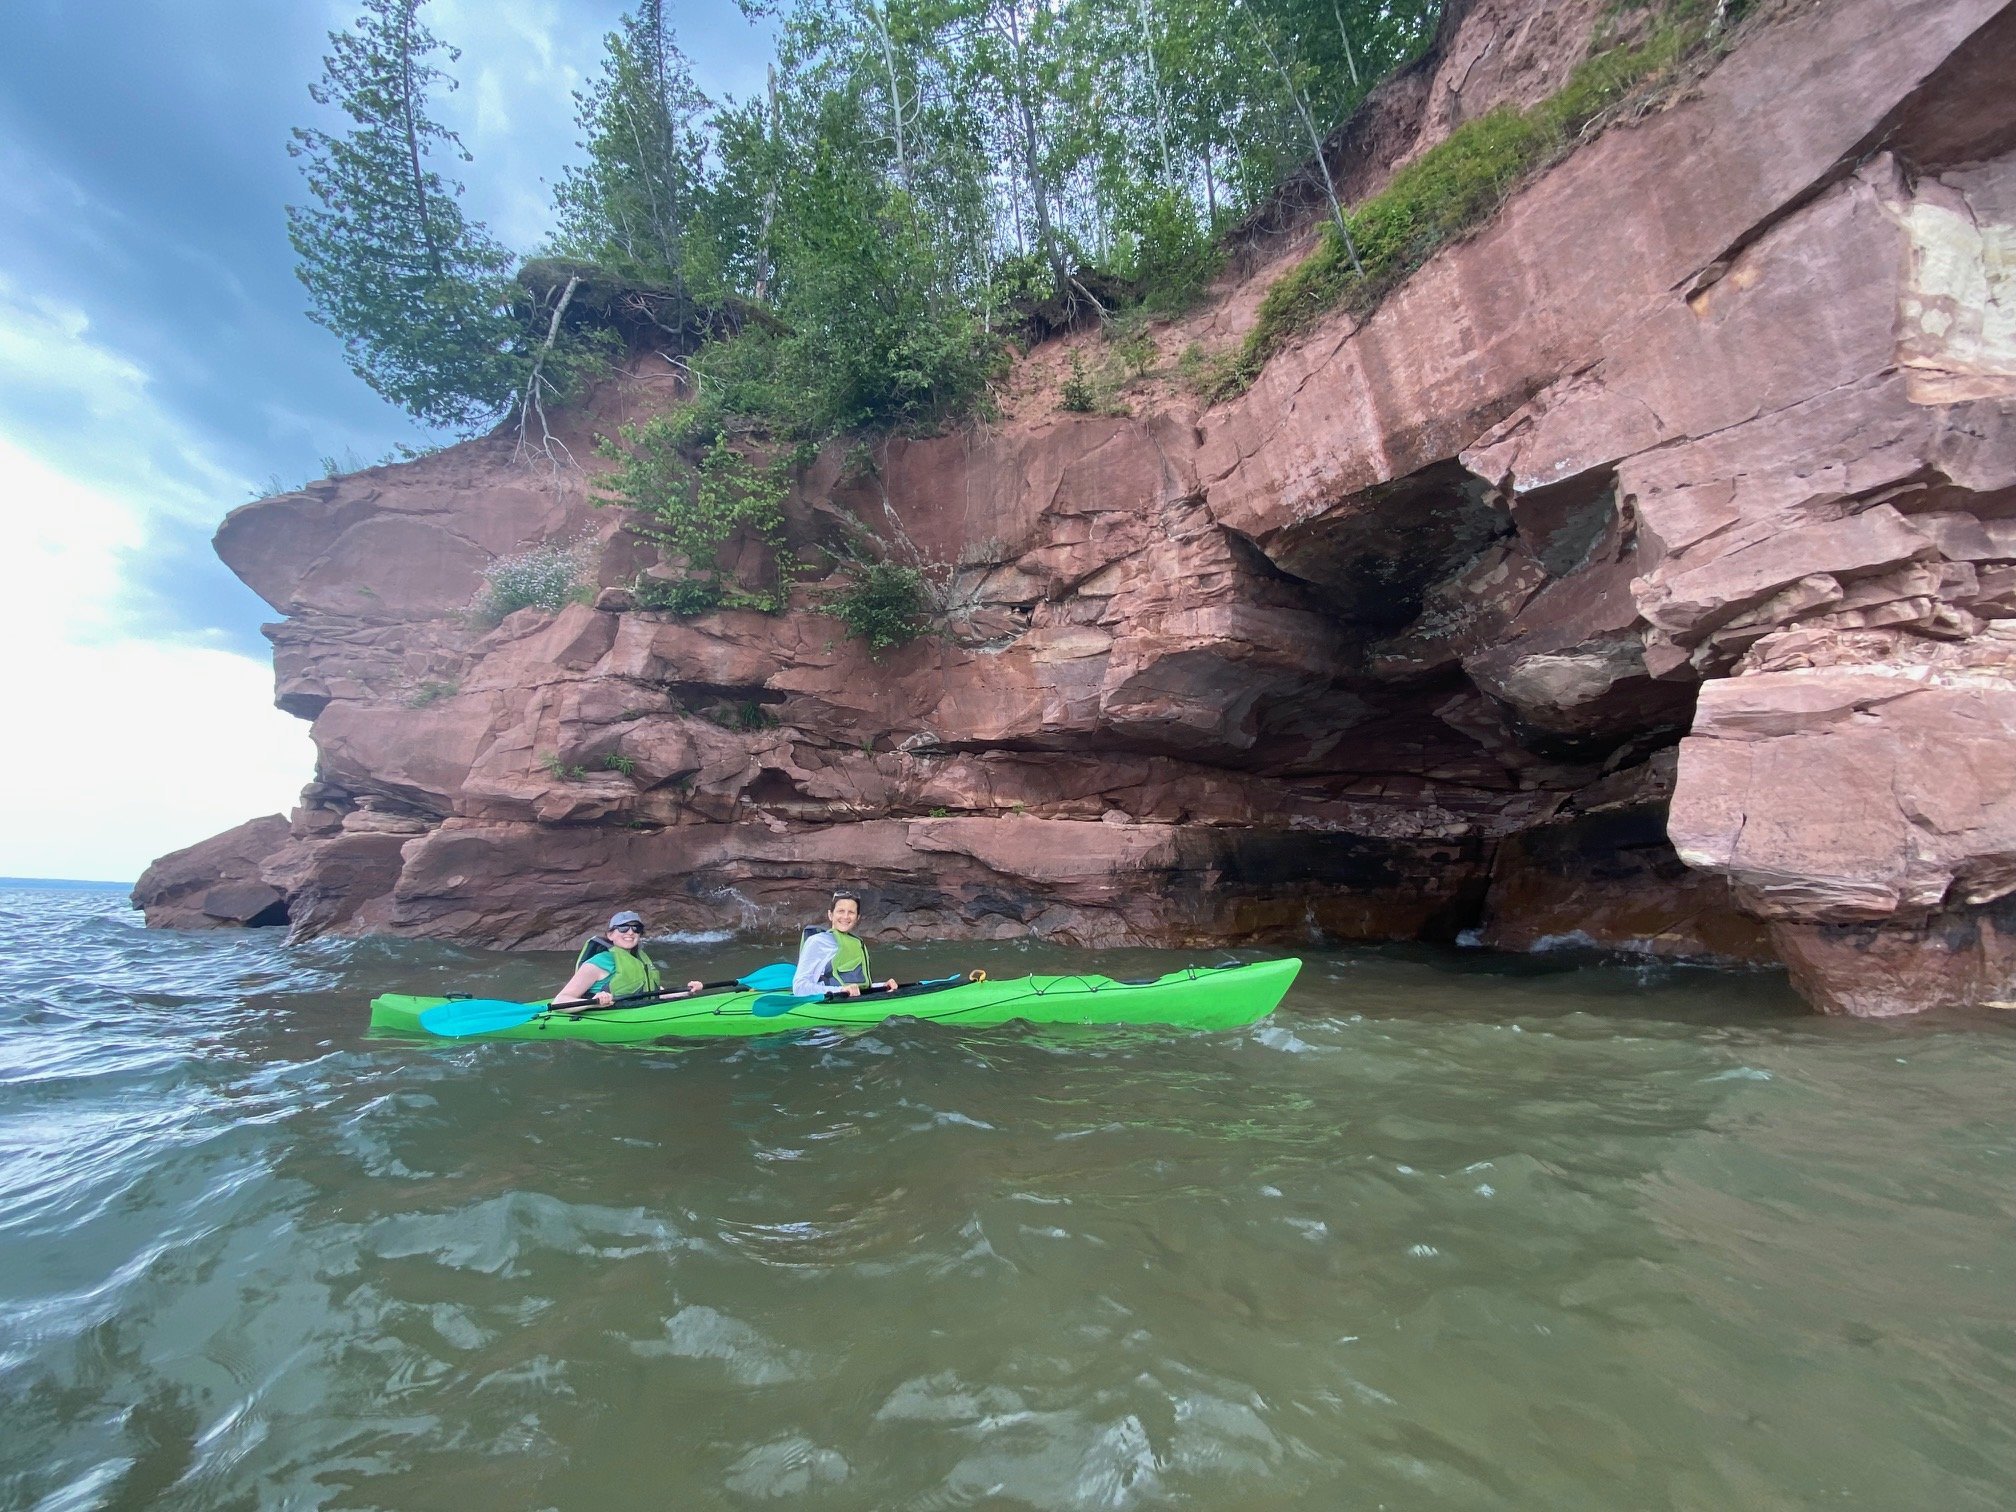  CE Core's Sarah Gollust (back of kayak) adventuring around the caves of Lake Superior with her dearest friend.  